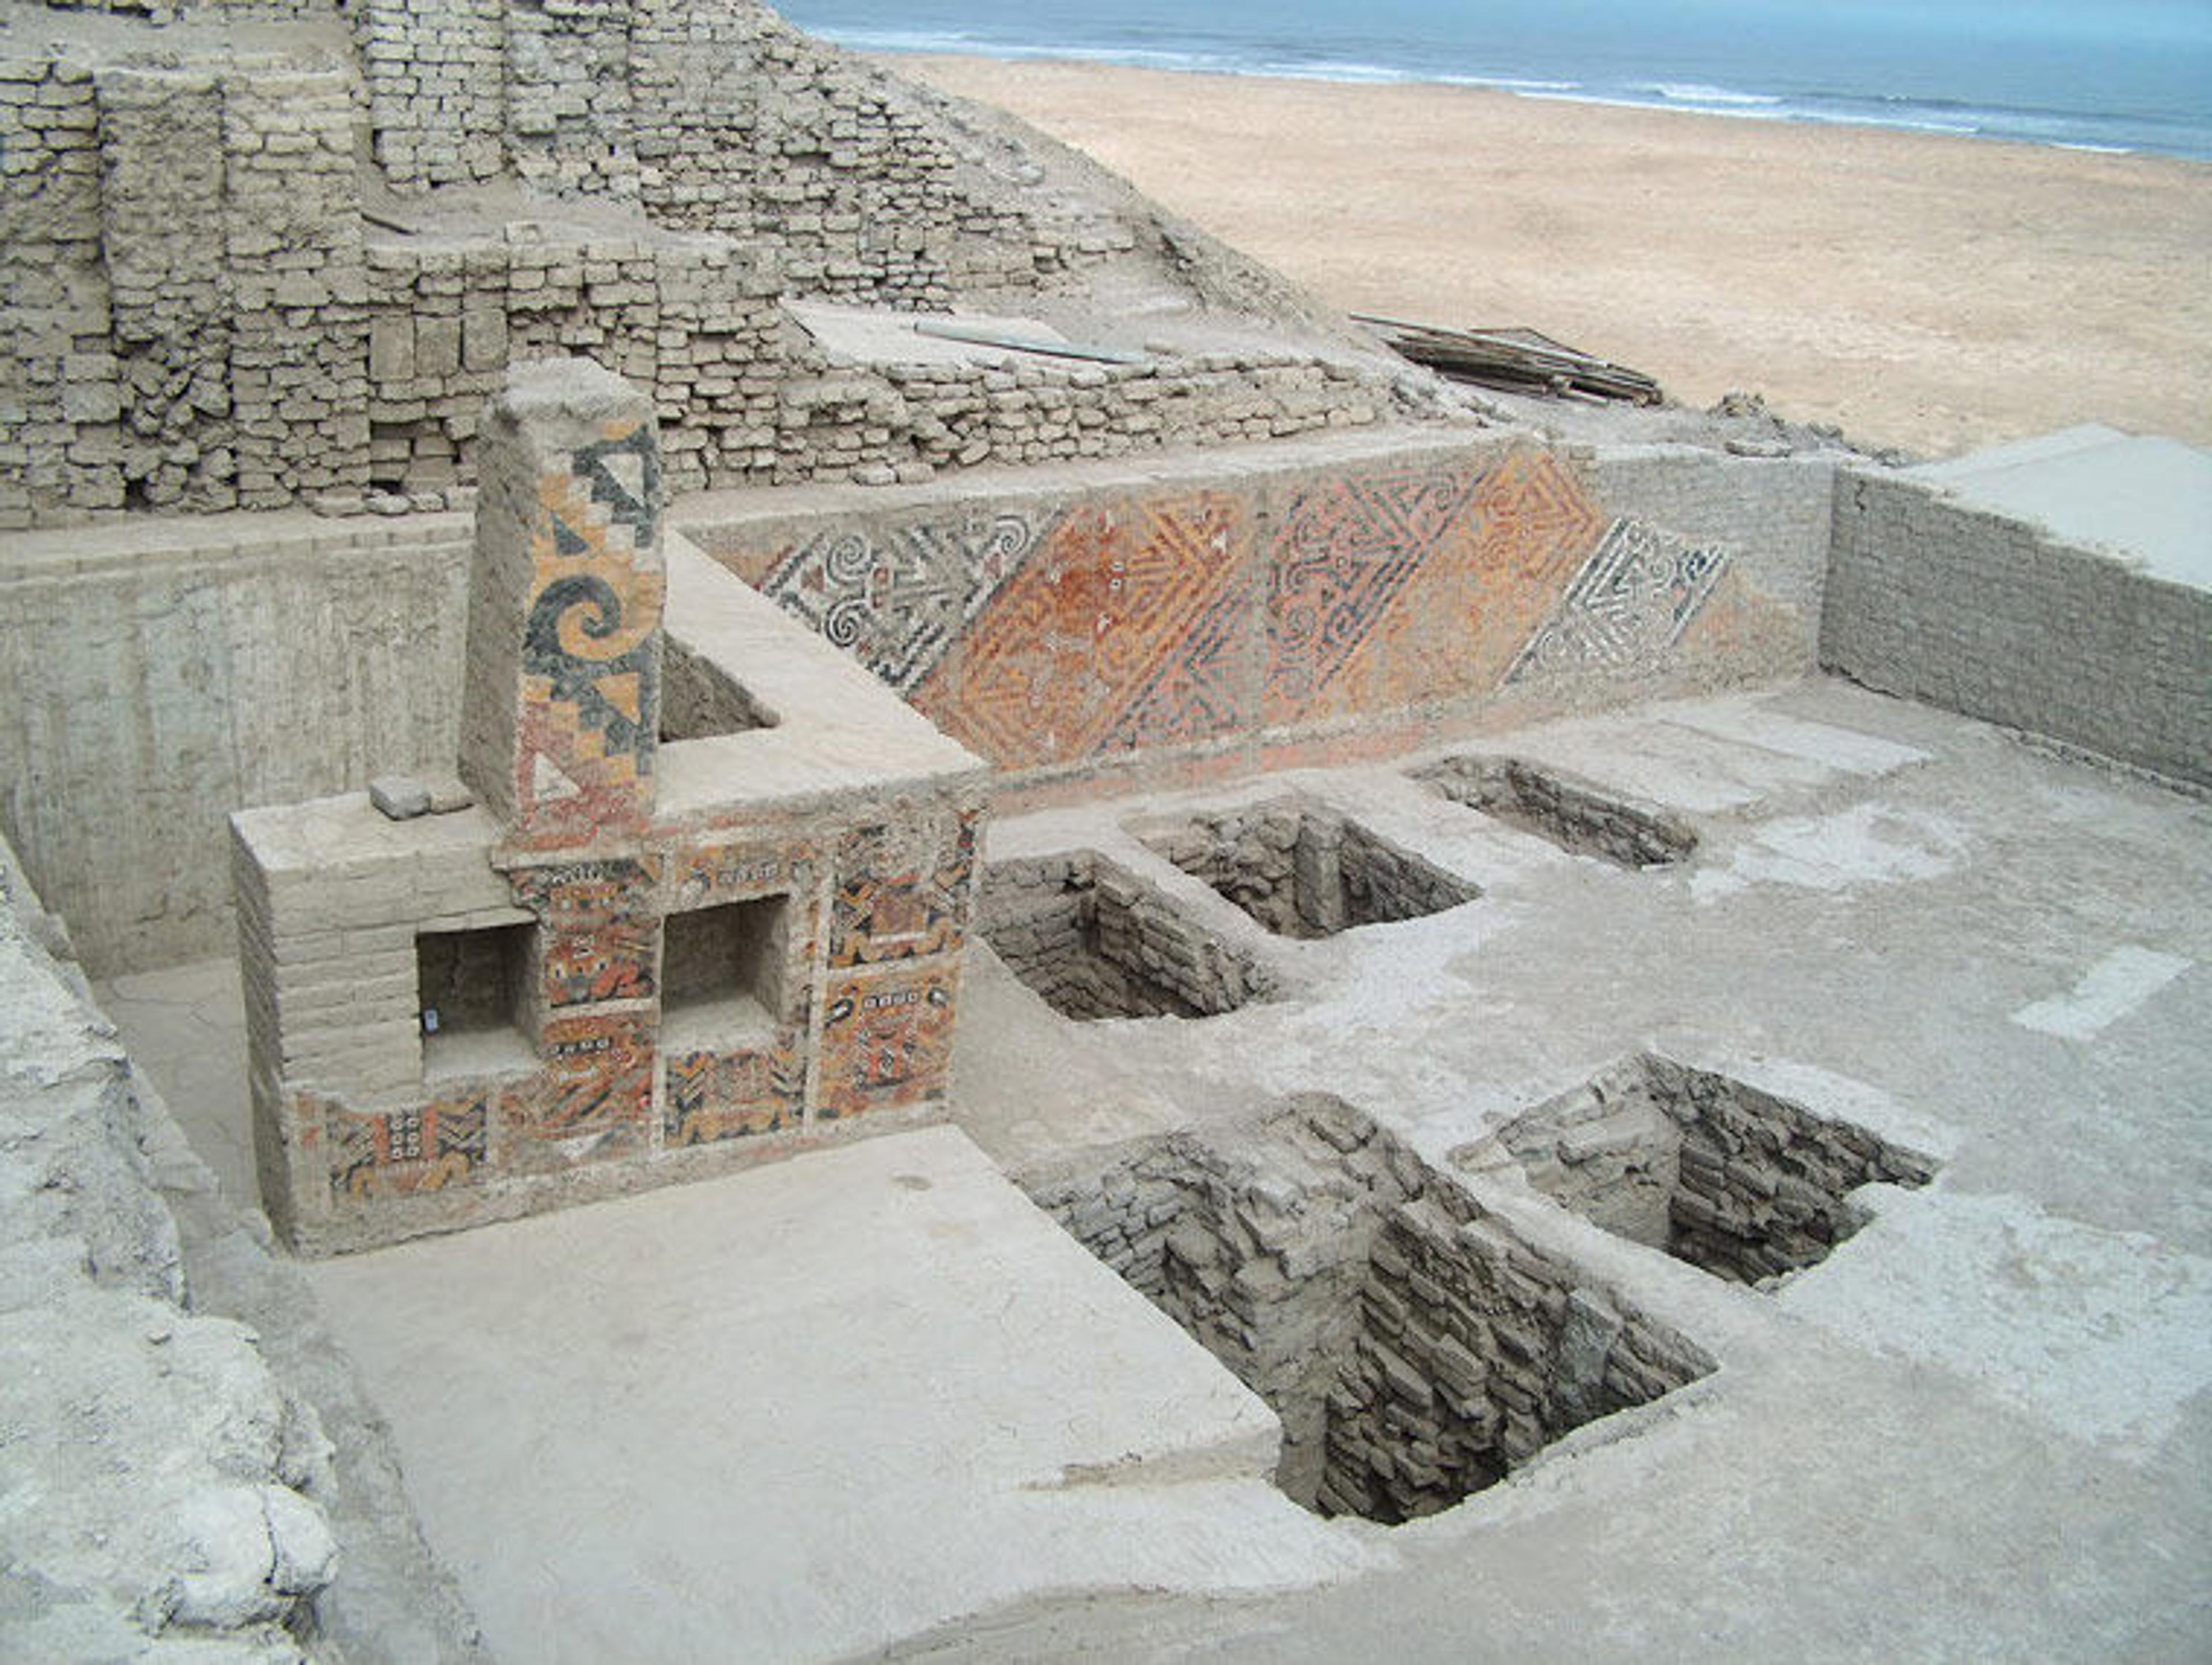 View of an excavation site in northern Peru, showing numerous tombs along the sandy coastline